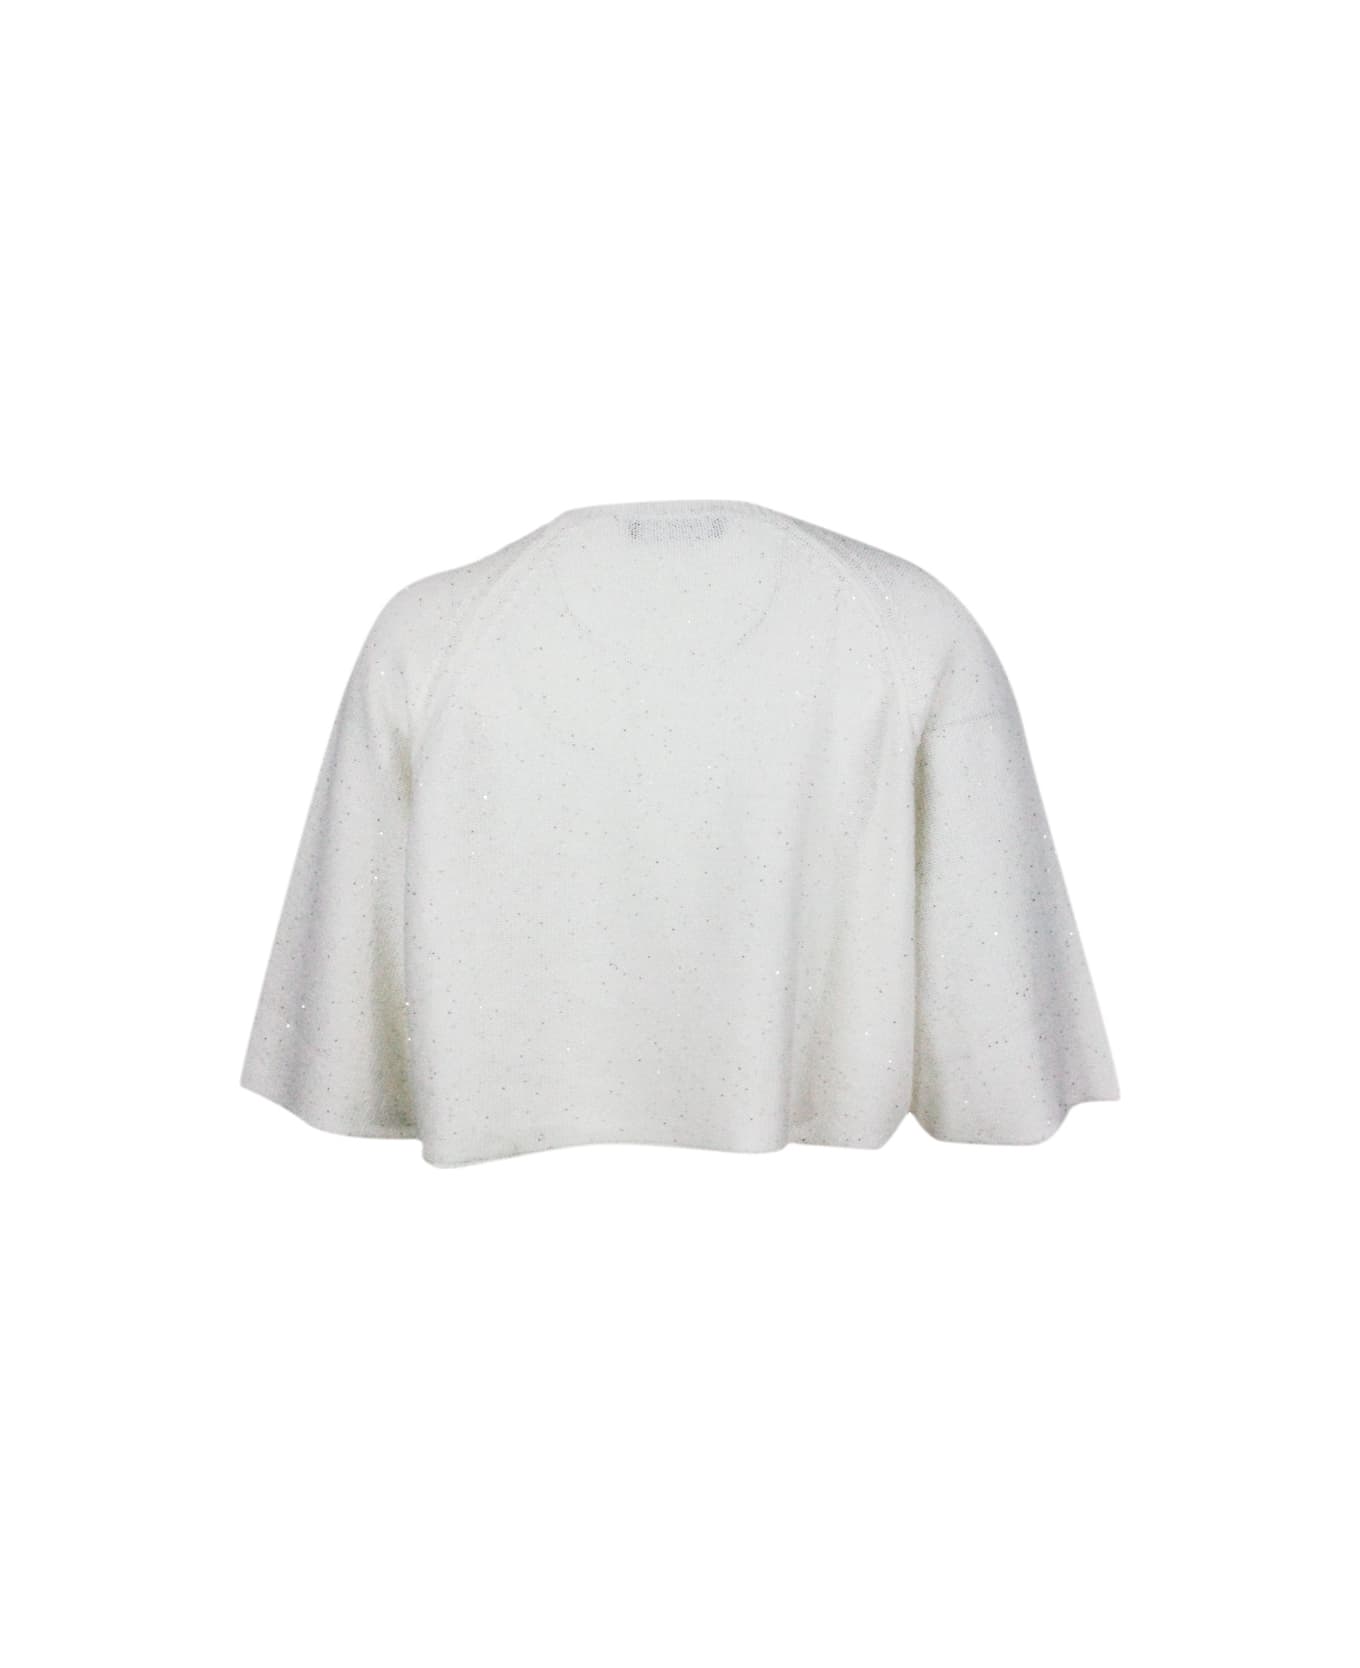 Fabiana Filippi Cape, Crew-neck And Half-sleeved Sweater In Cotton And Linen - Bianco ニットウェア